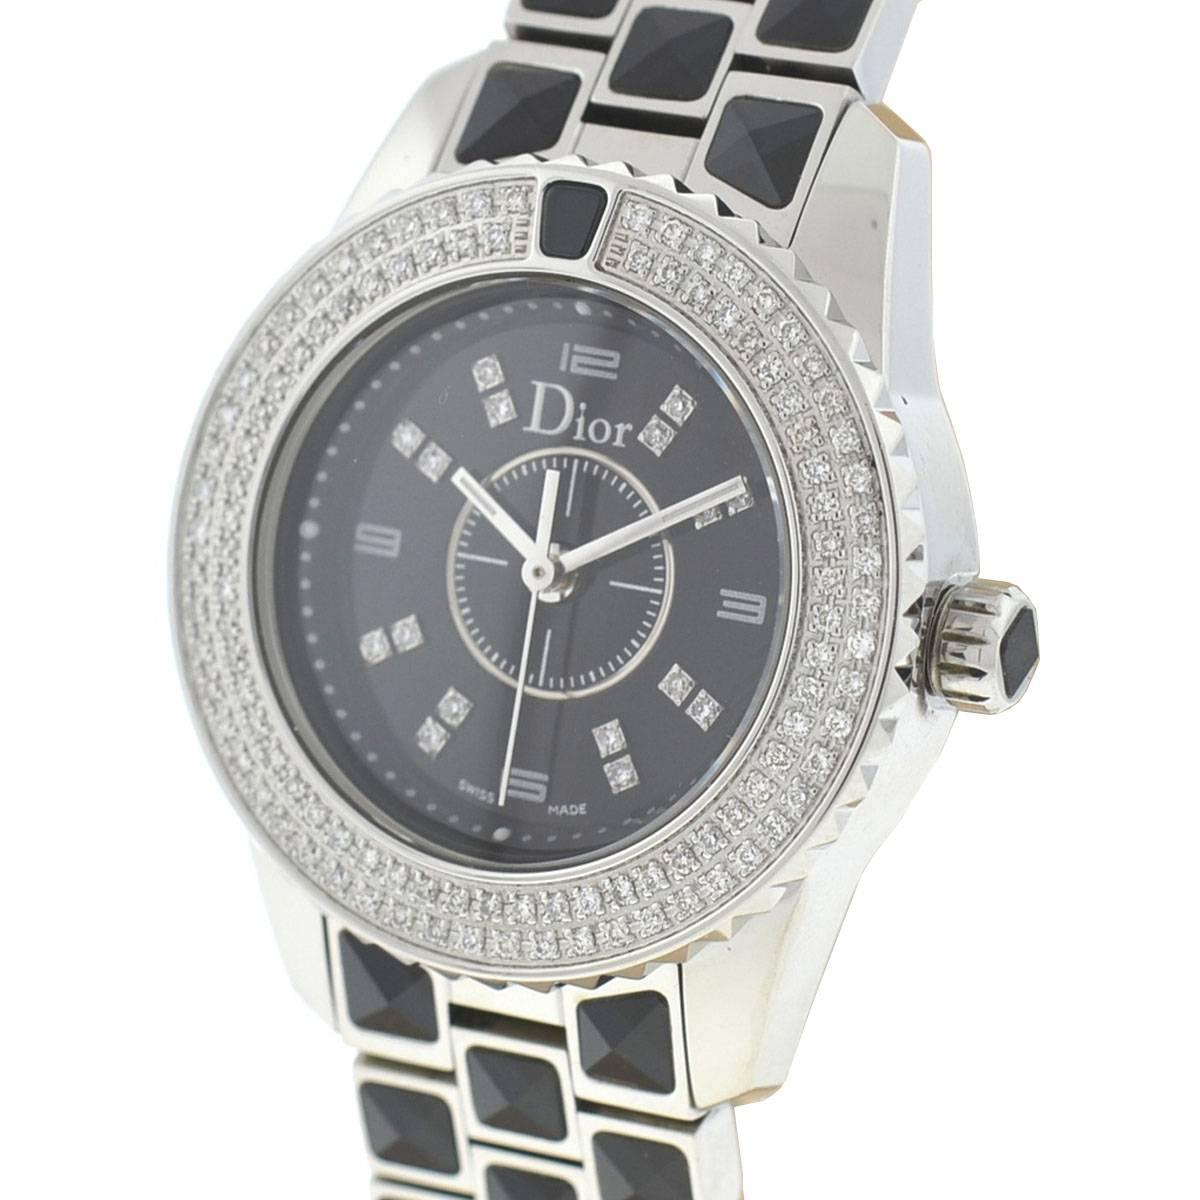 Company - Christian Dior
Model - Christal CD112119
Case Metal - Stainless Steel
Case Measurement - 29mm
Bracelet - Stainless Steel and Black Sapphire Crystals
Dial - Black w/ Diamonds
Bezel - Diamonds
Crystal - Scratch Resistant Sapphire
Movement -